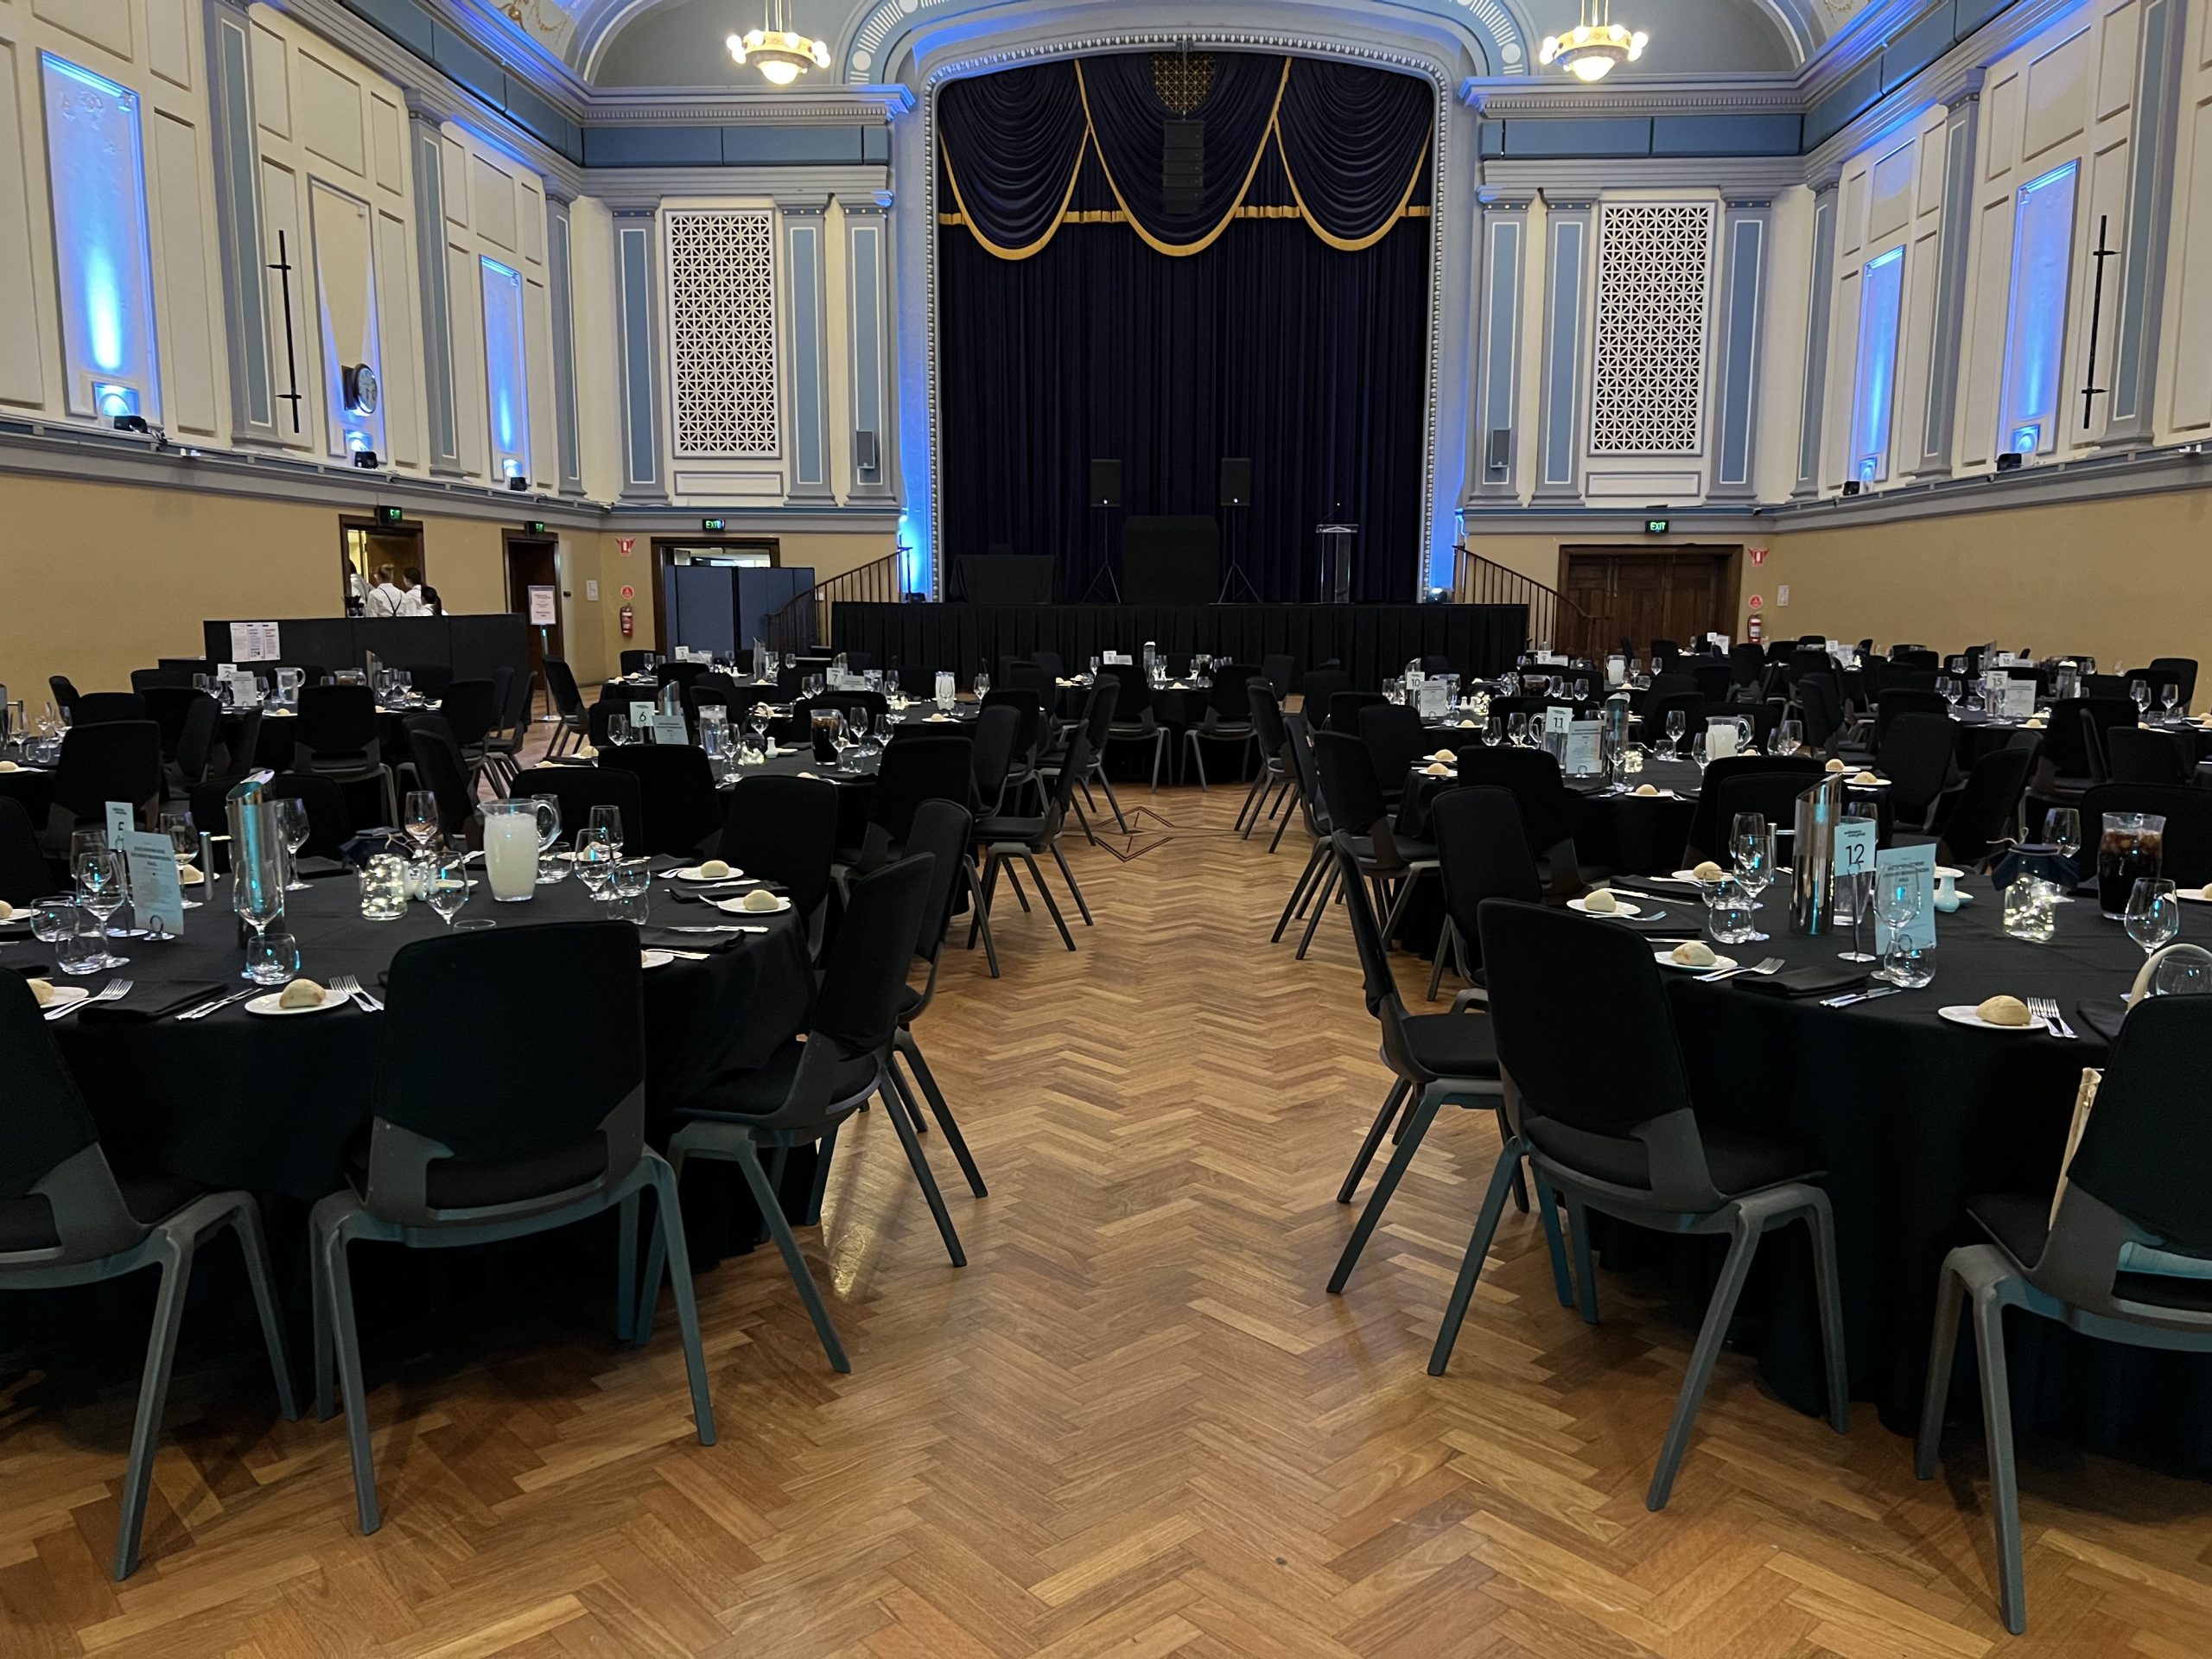 A beautifully decorated wedding venue at Malvern Town Hall with tables and chairs arranged for the celebration.